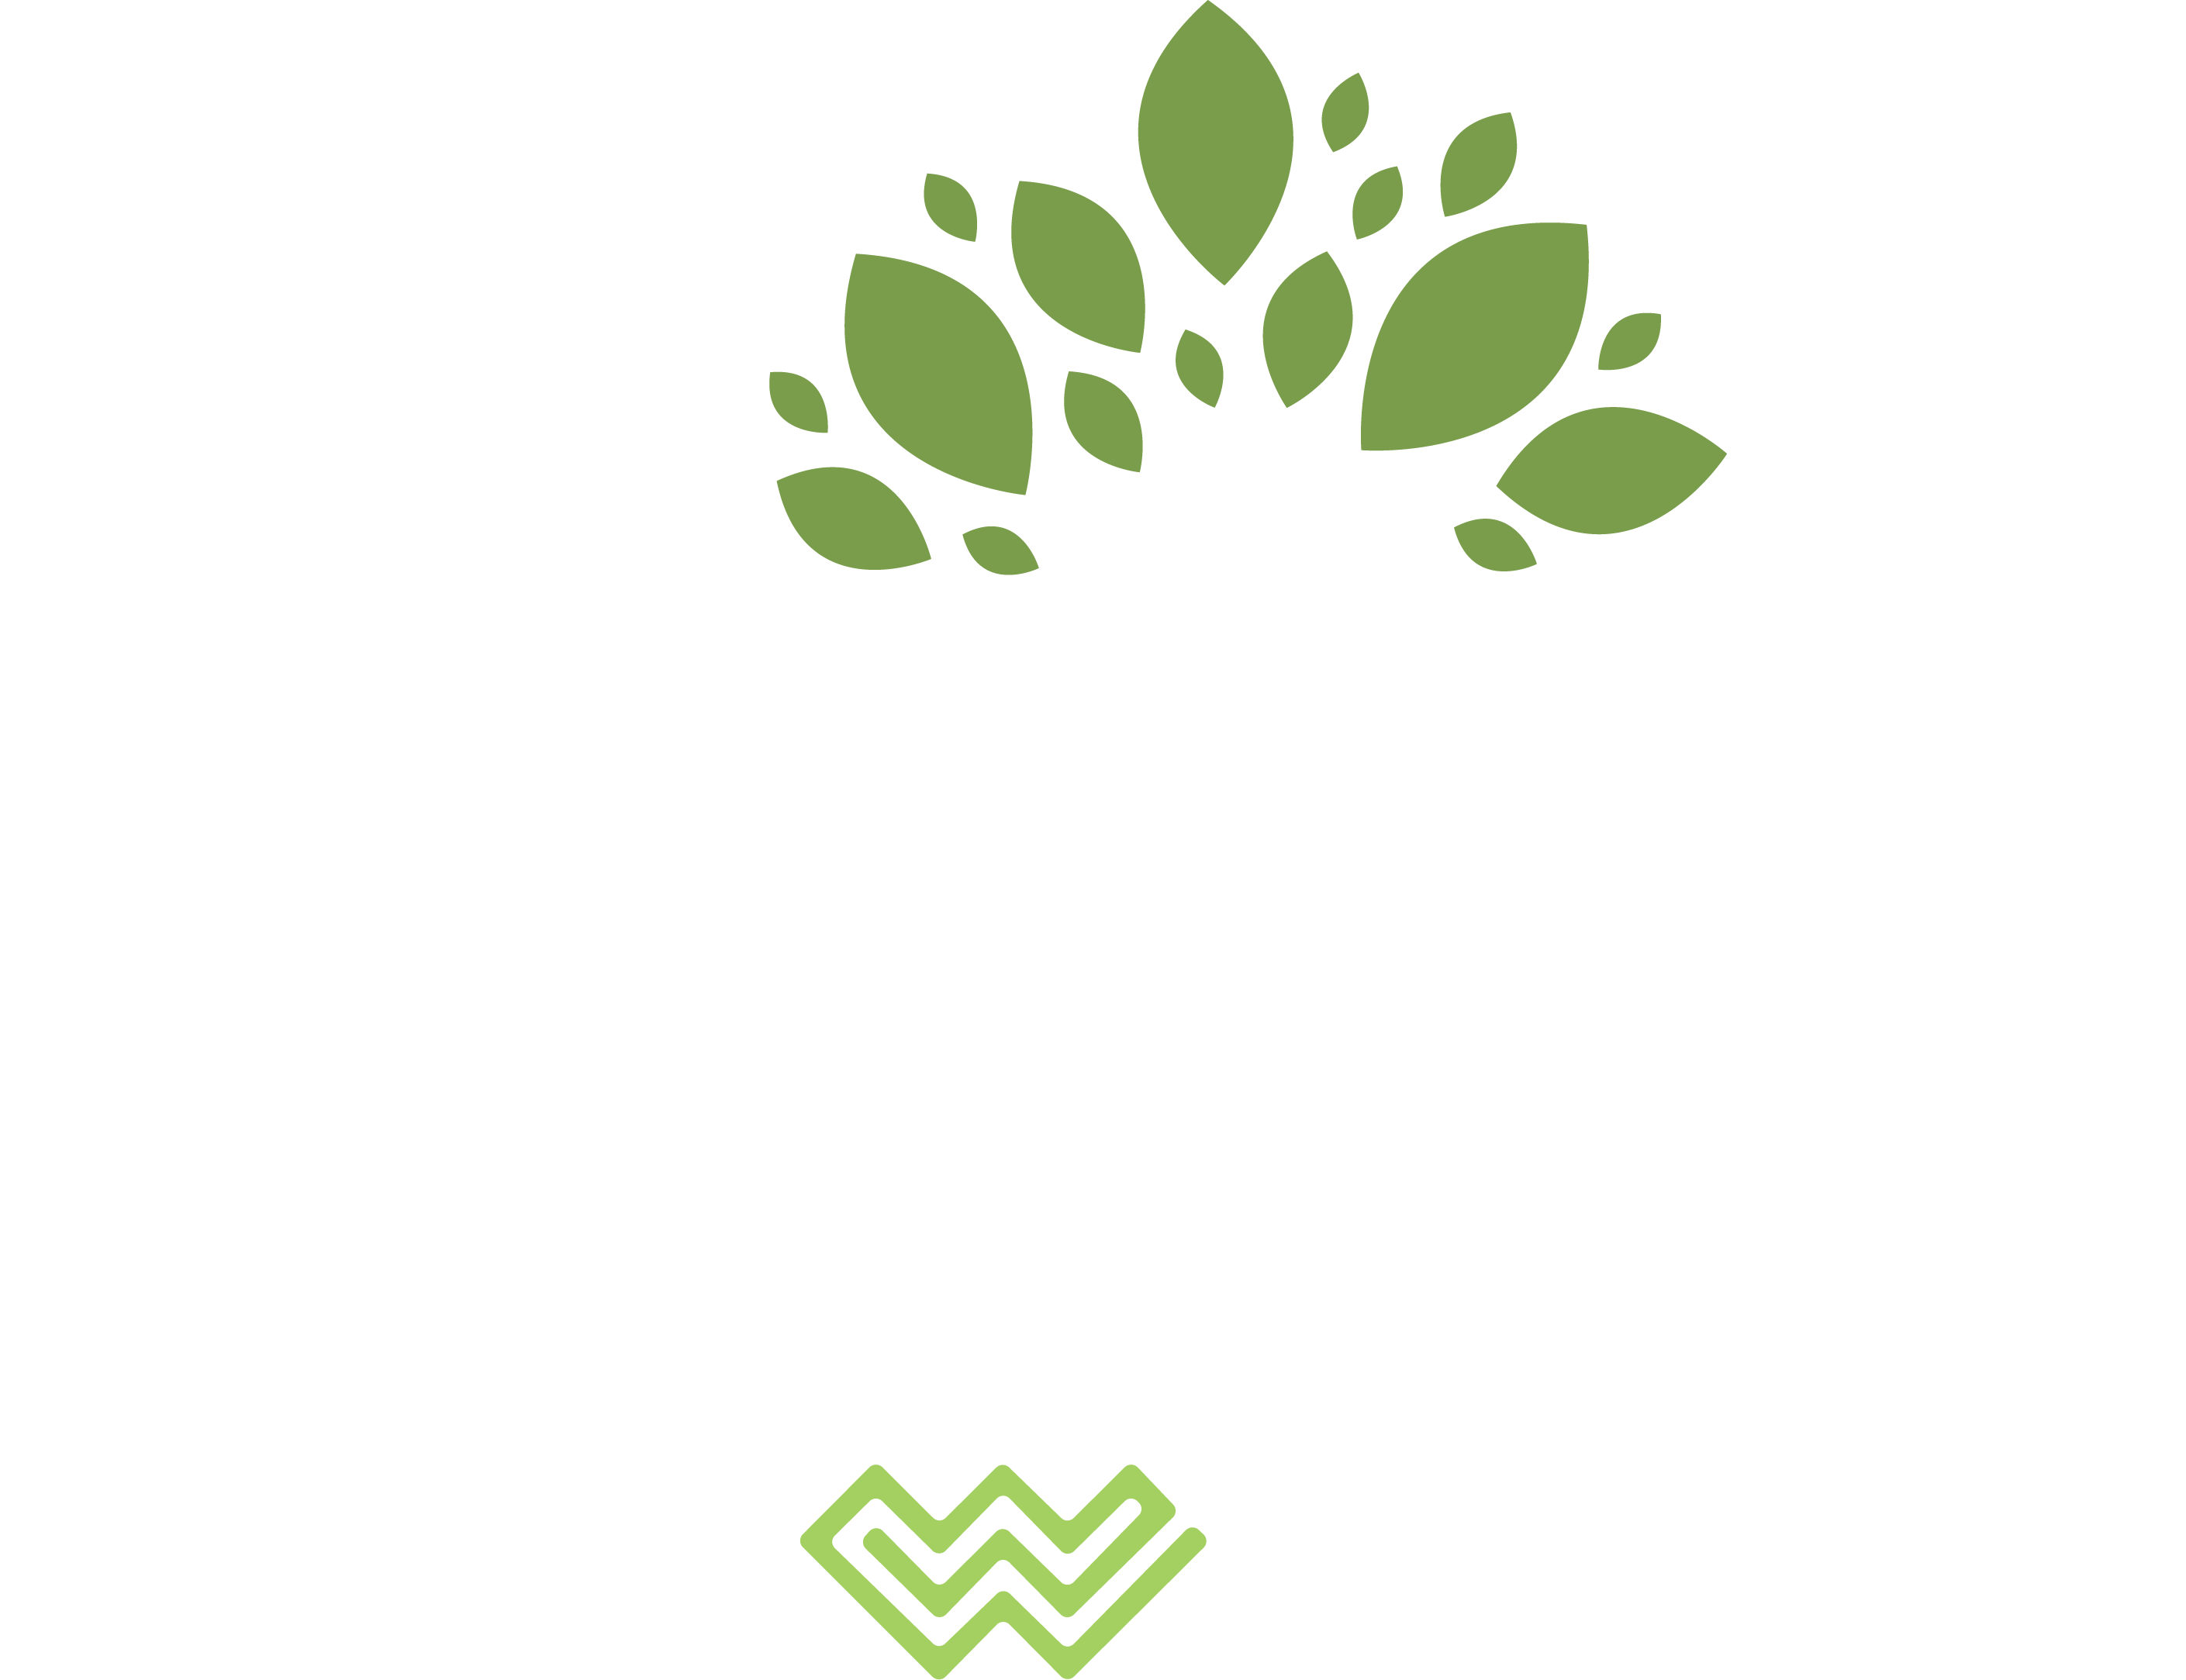 Aspire counseling services alcohol treatment